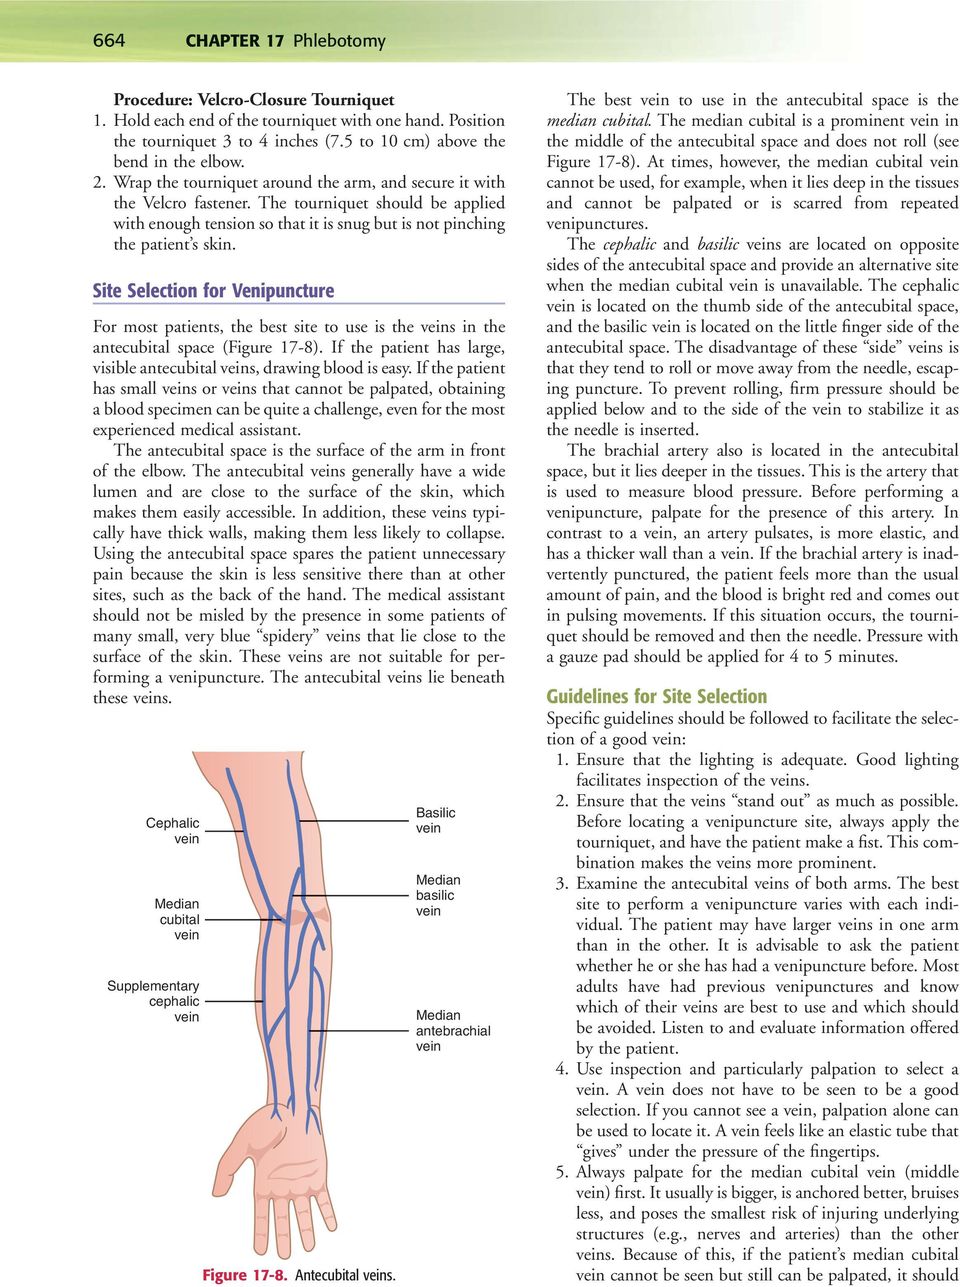 Site Selection for Venipuncture For most patients, the best site to use is the veins in the antecubital space (Figure 17-8). If the patient has large, visible antecubital veins, drawing blood is easy.